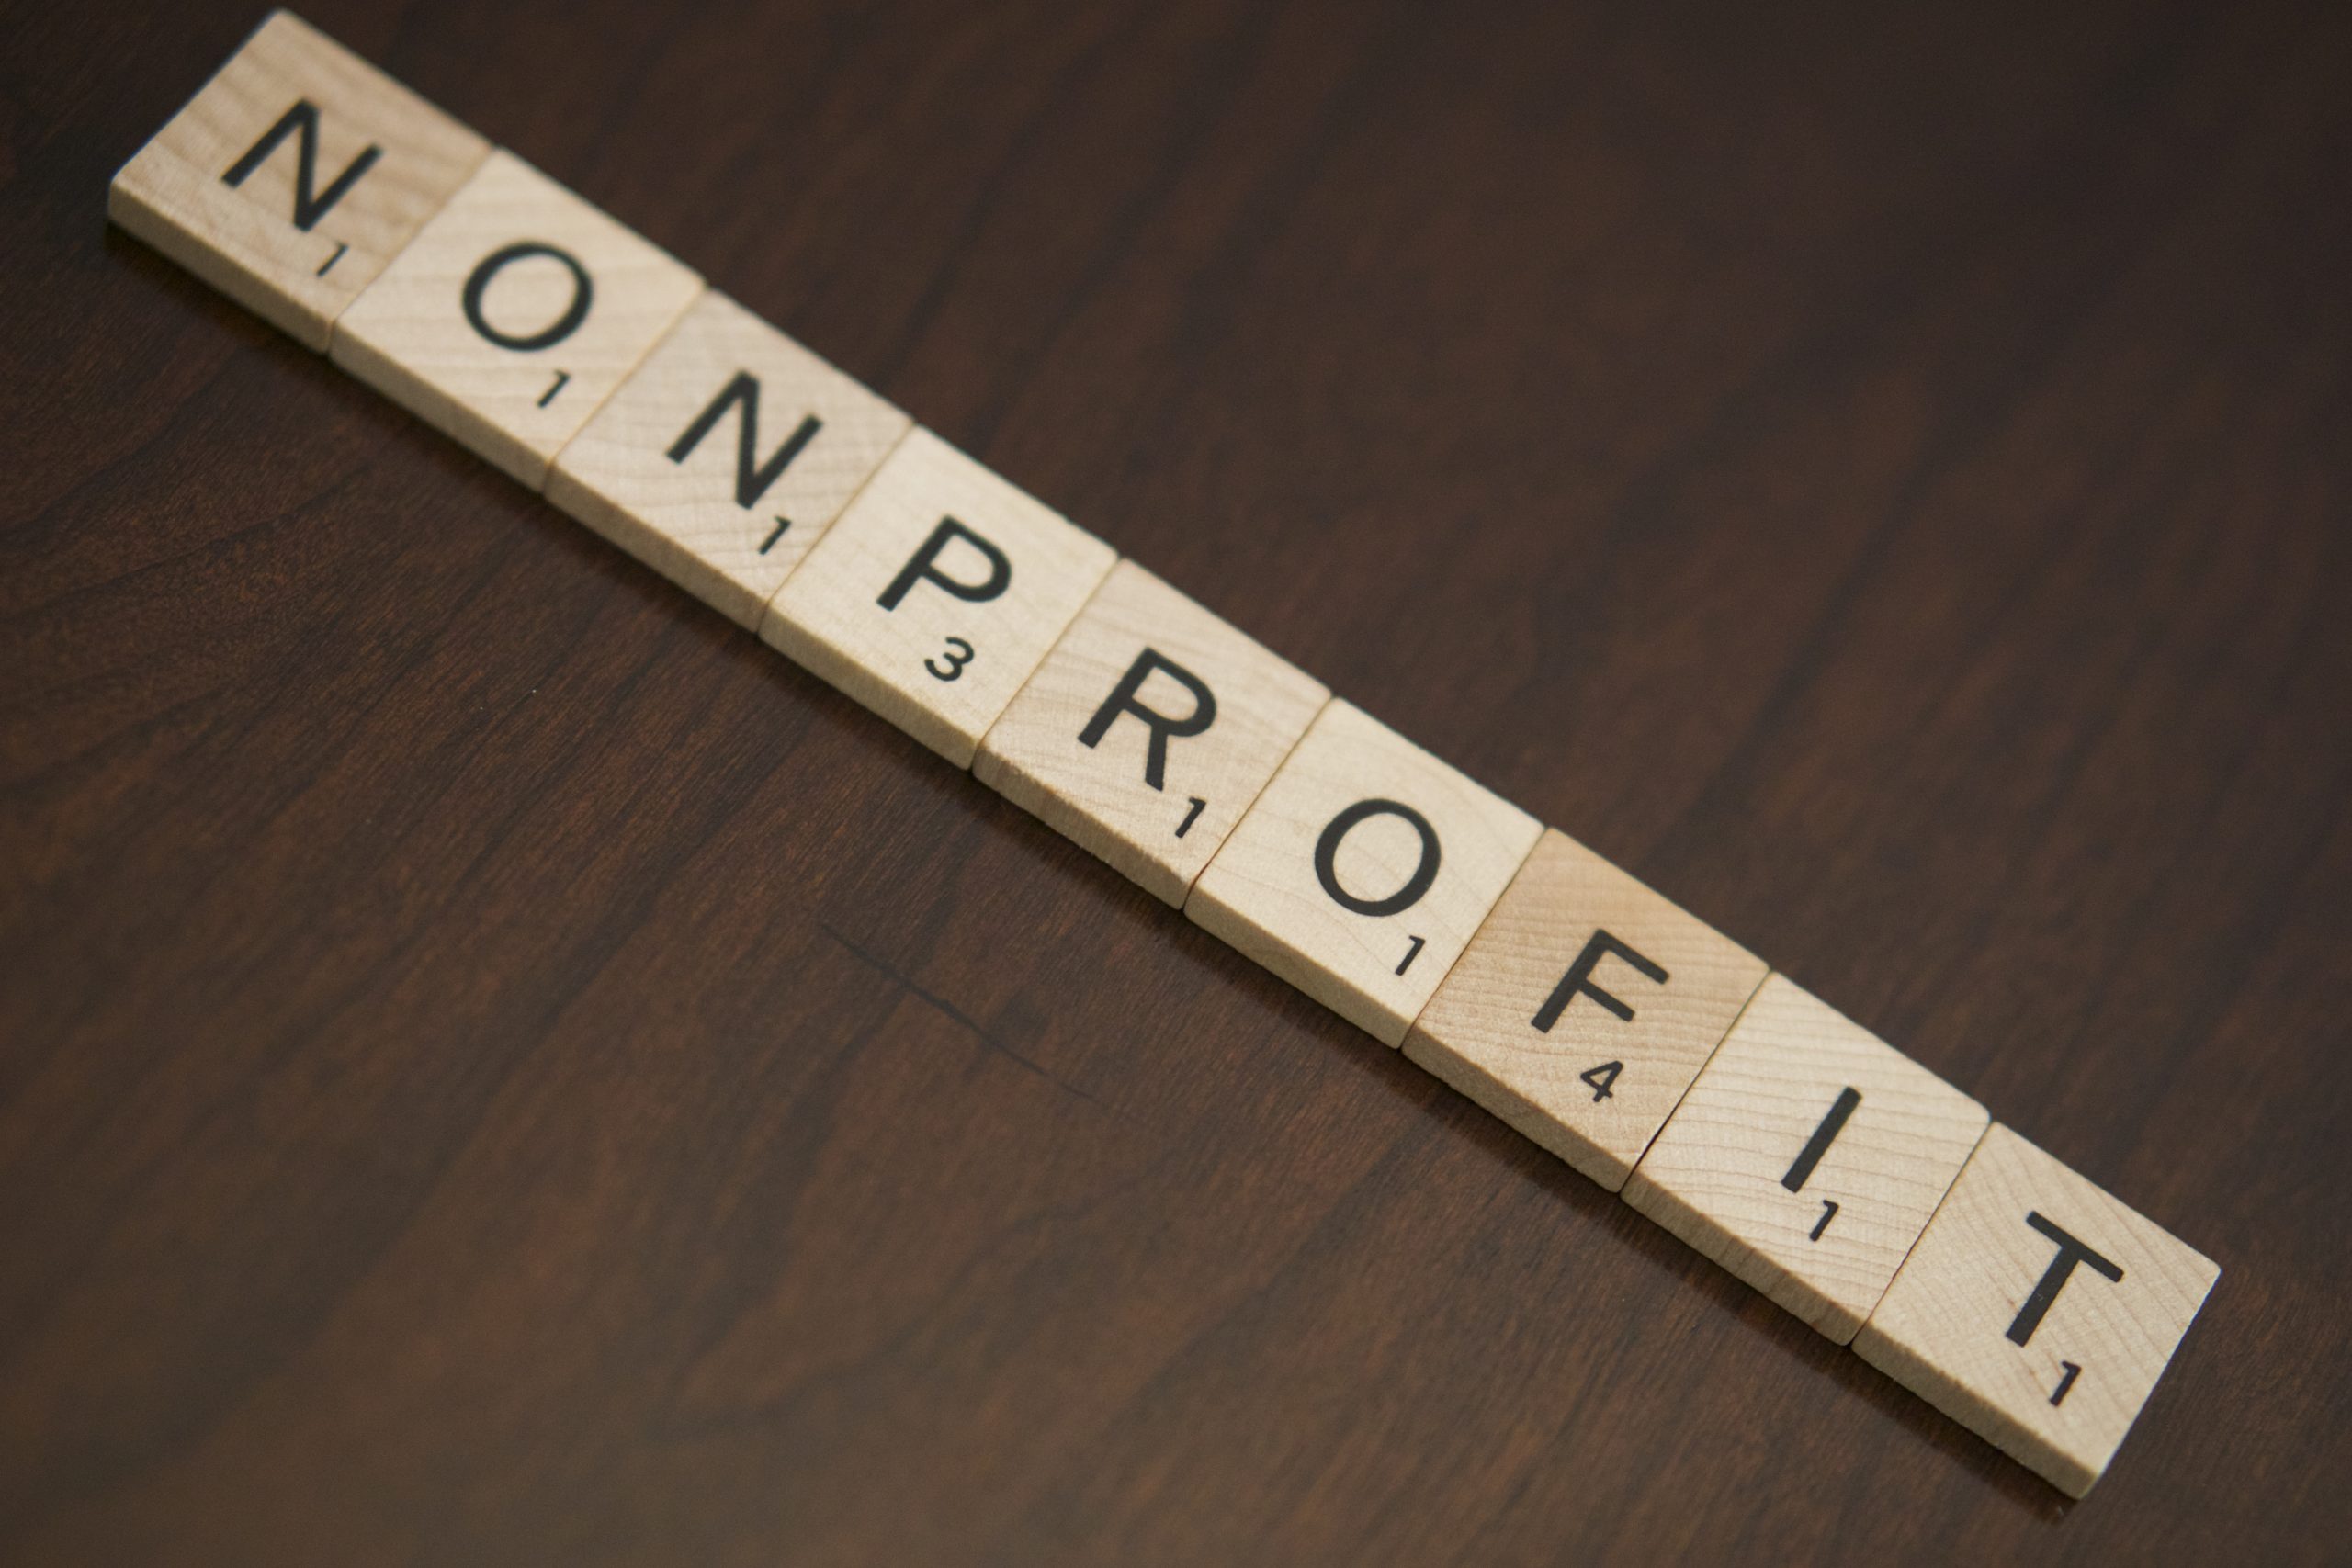 Nonprofit spelled out in scrabble letters